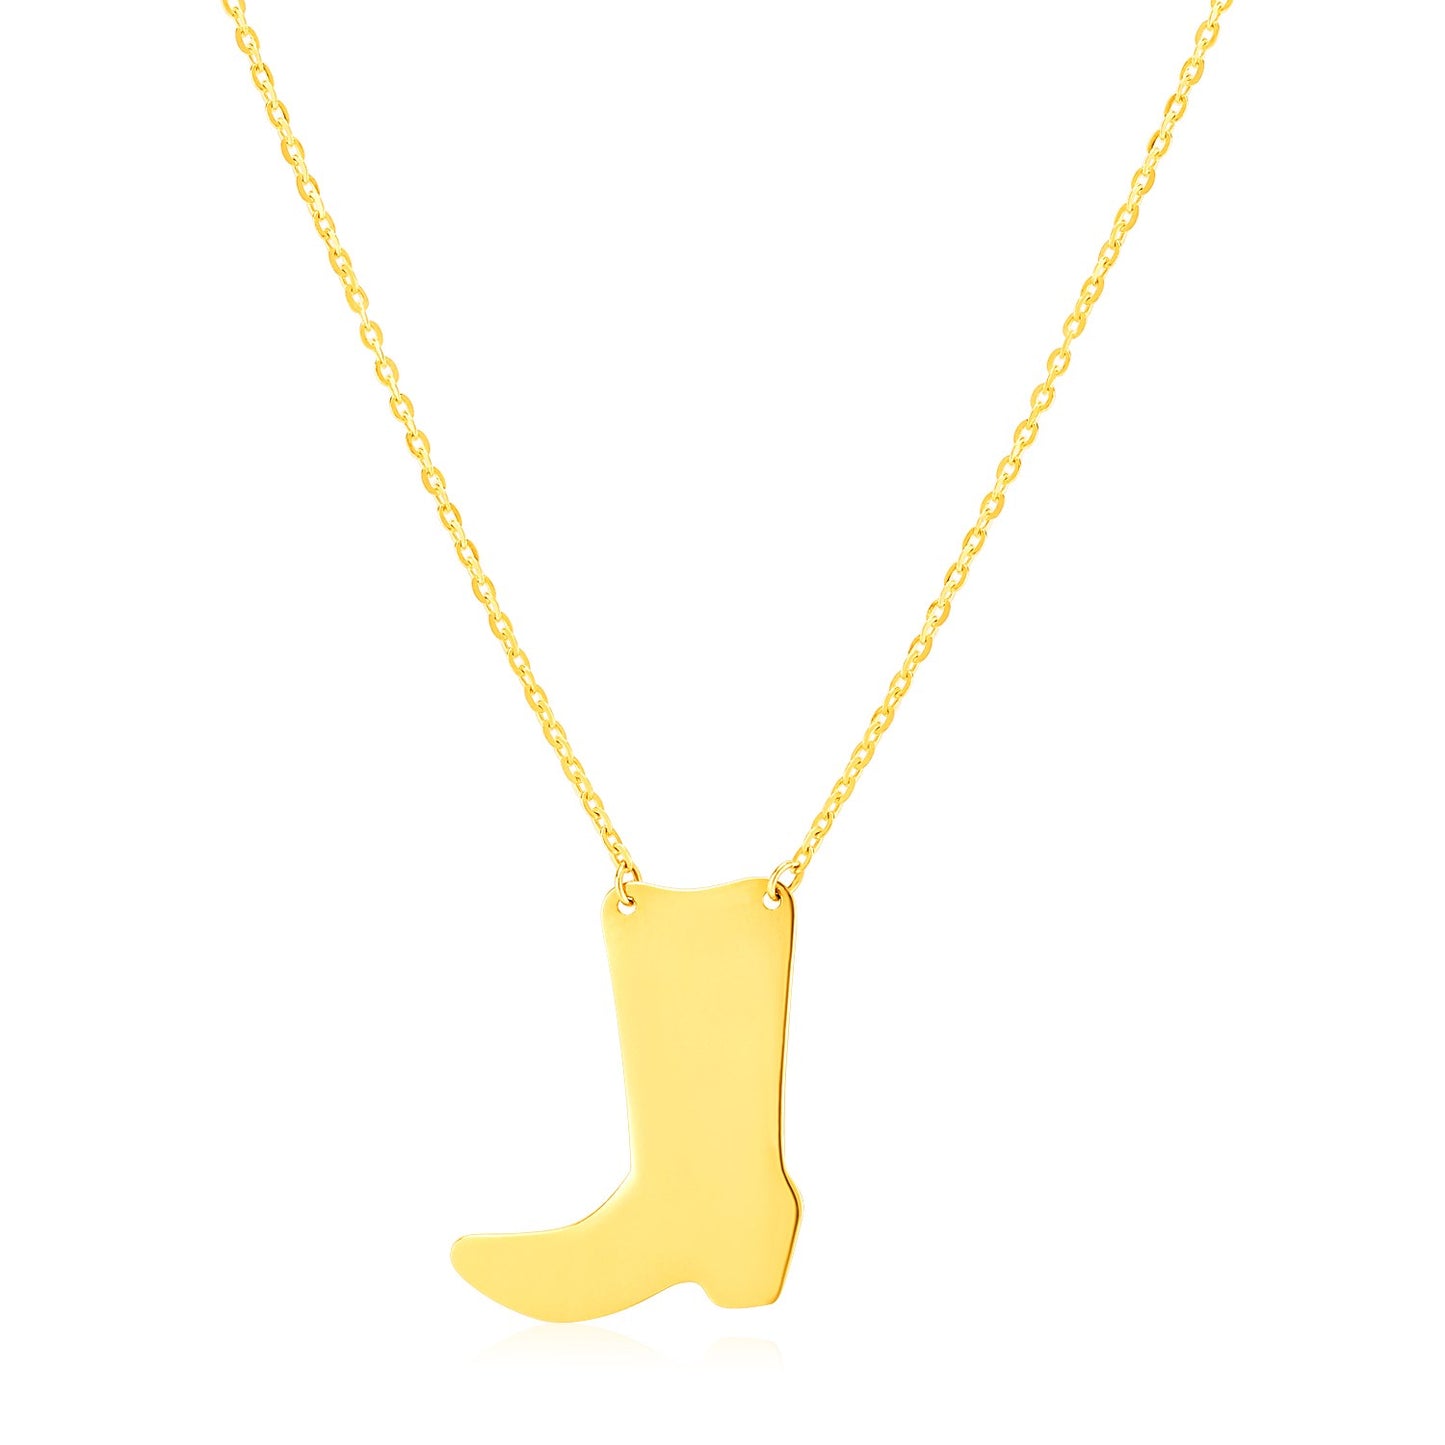 14K Yellow Gold Necklace with Cowboy Boot